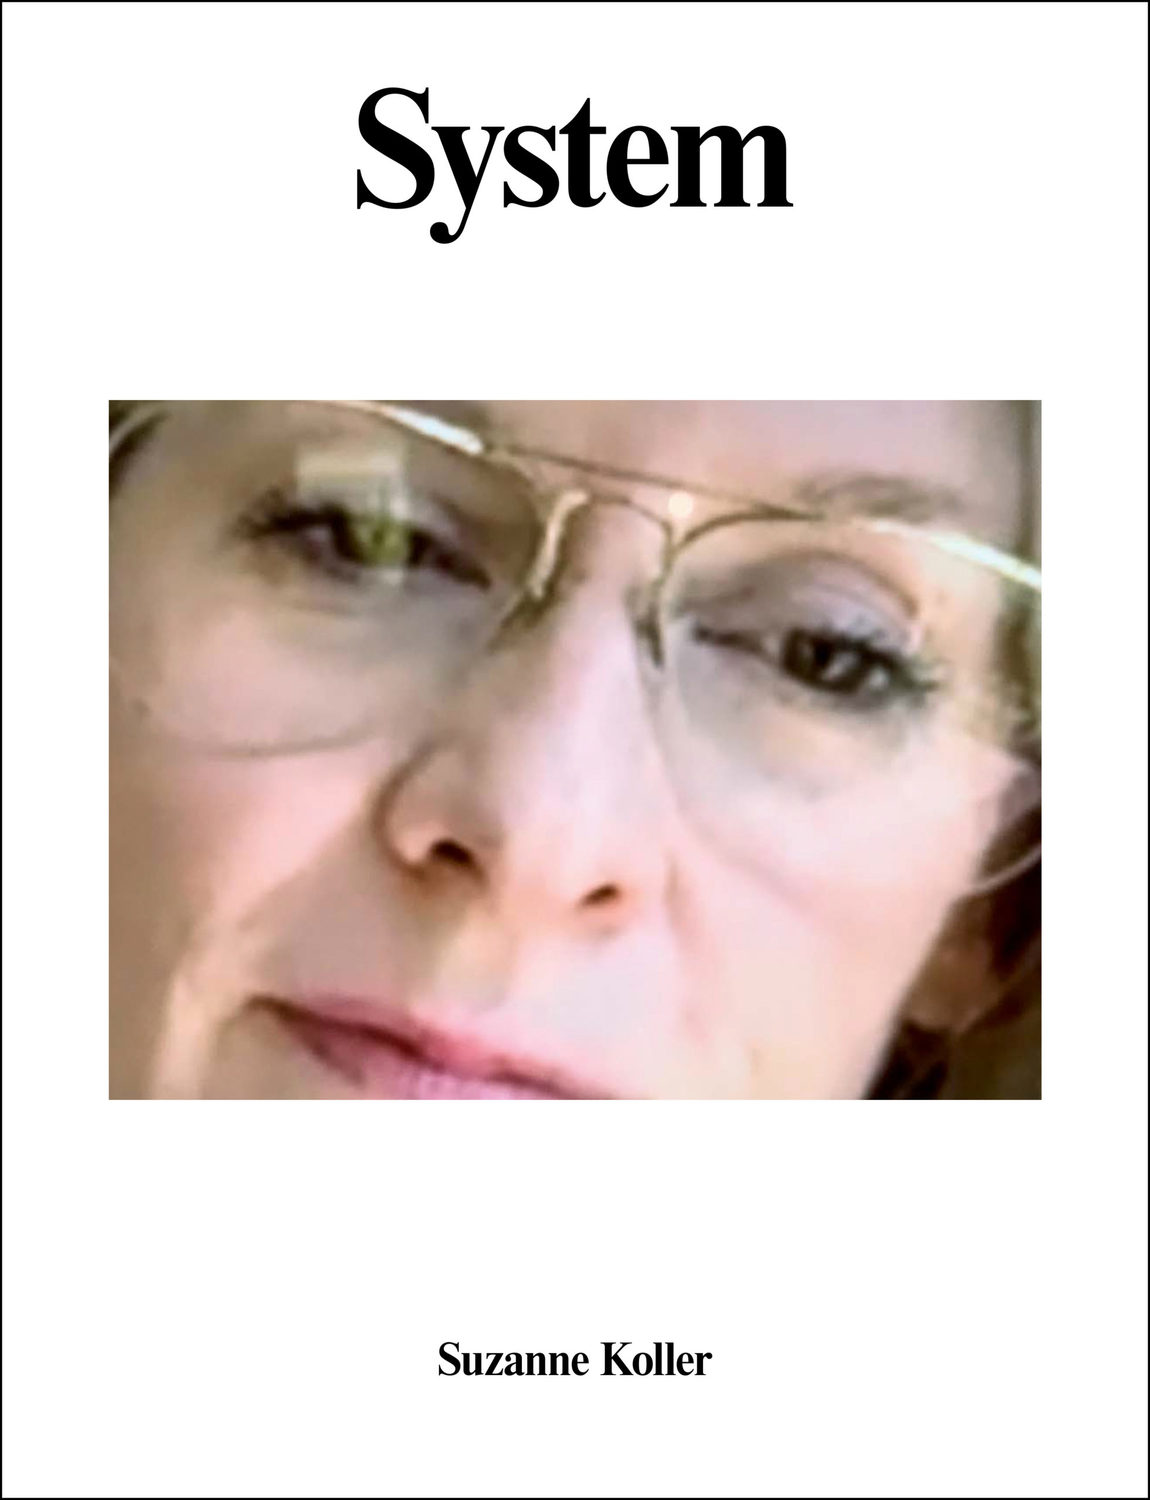 SYSTEM15-COVER-Suzanne-Koller-scaled.jpg